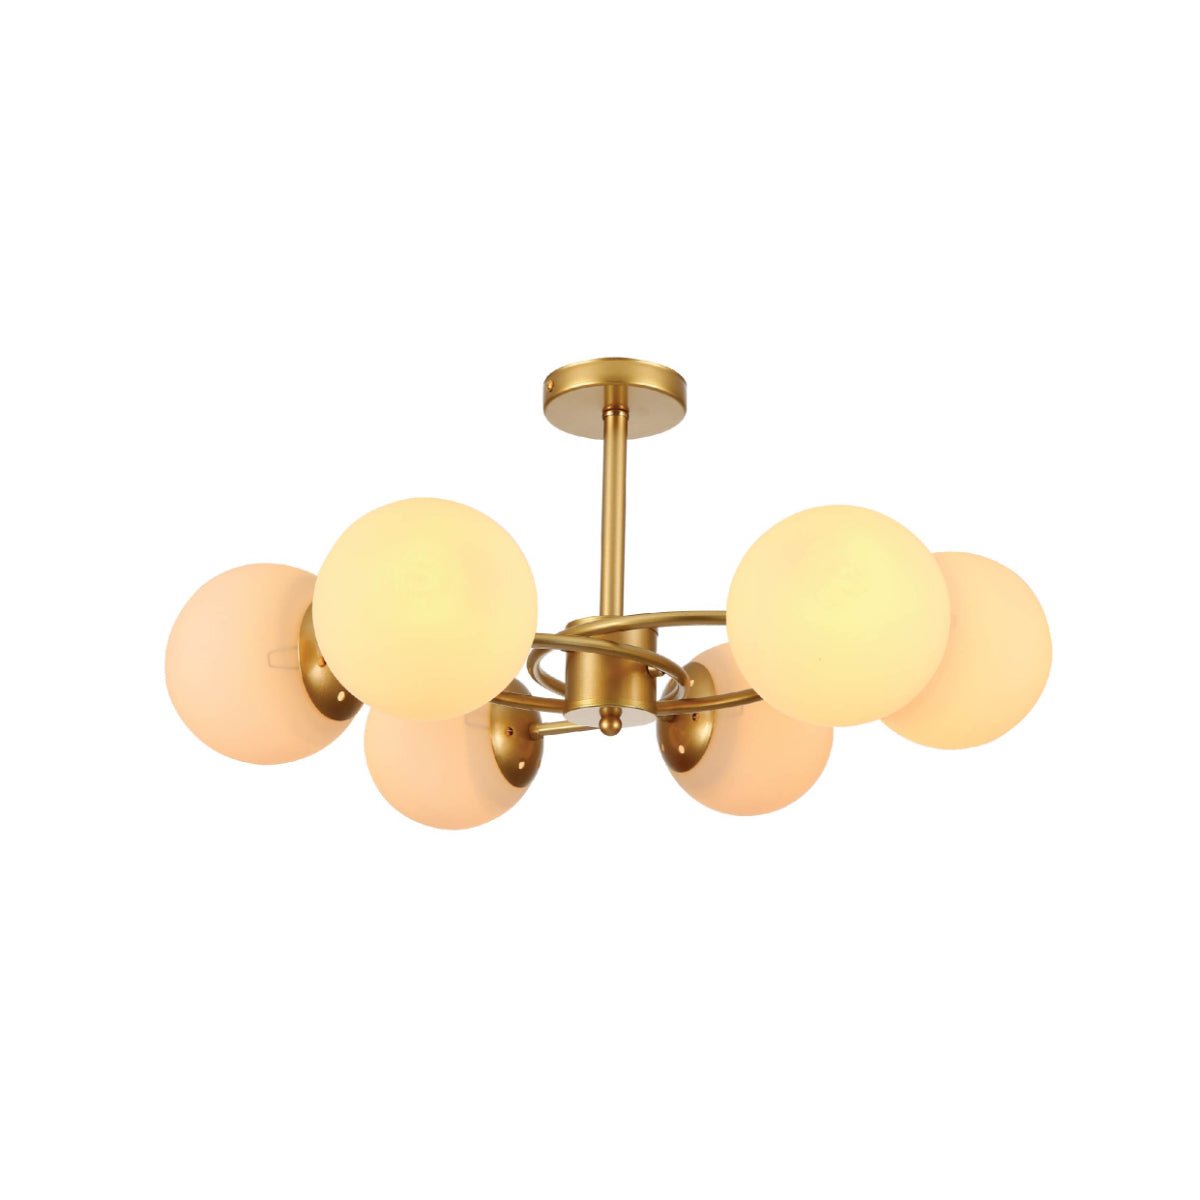 Main image of Gold Crescent Body Opal Globe Ceiling Light with E27 Fittings | TEKLED 159-17670